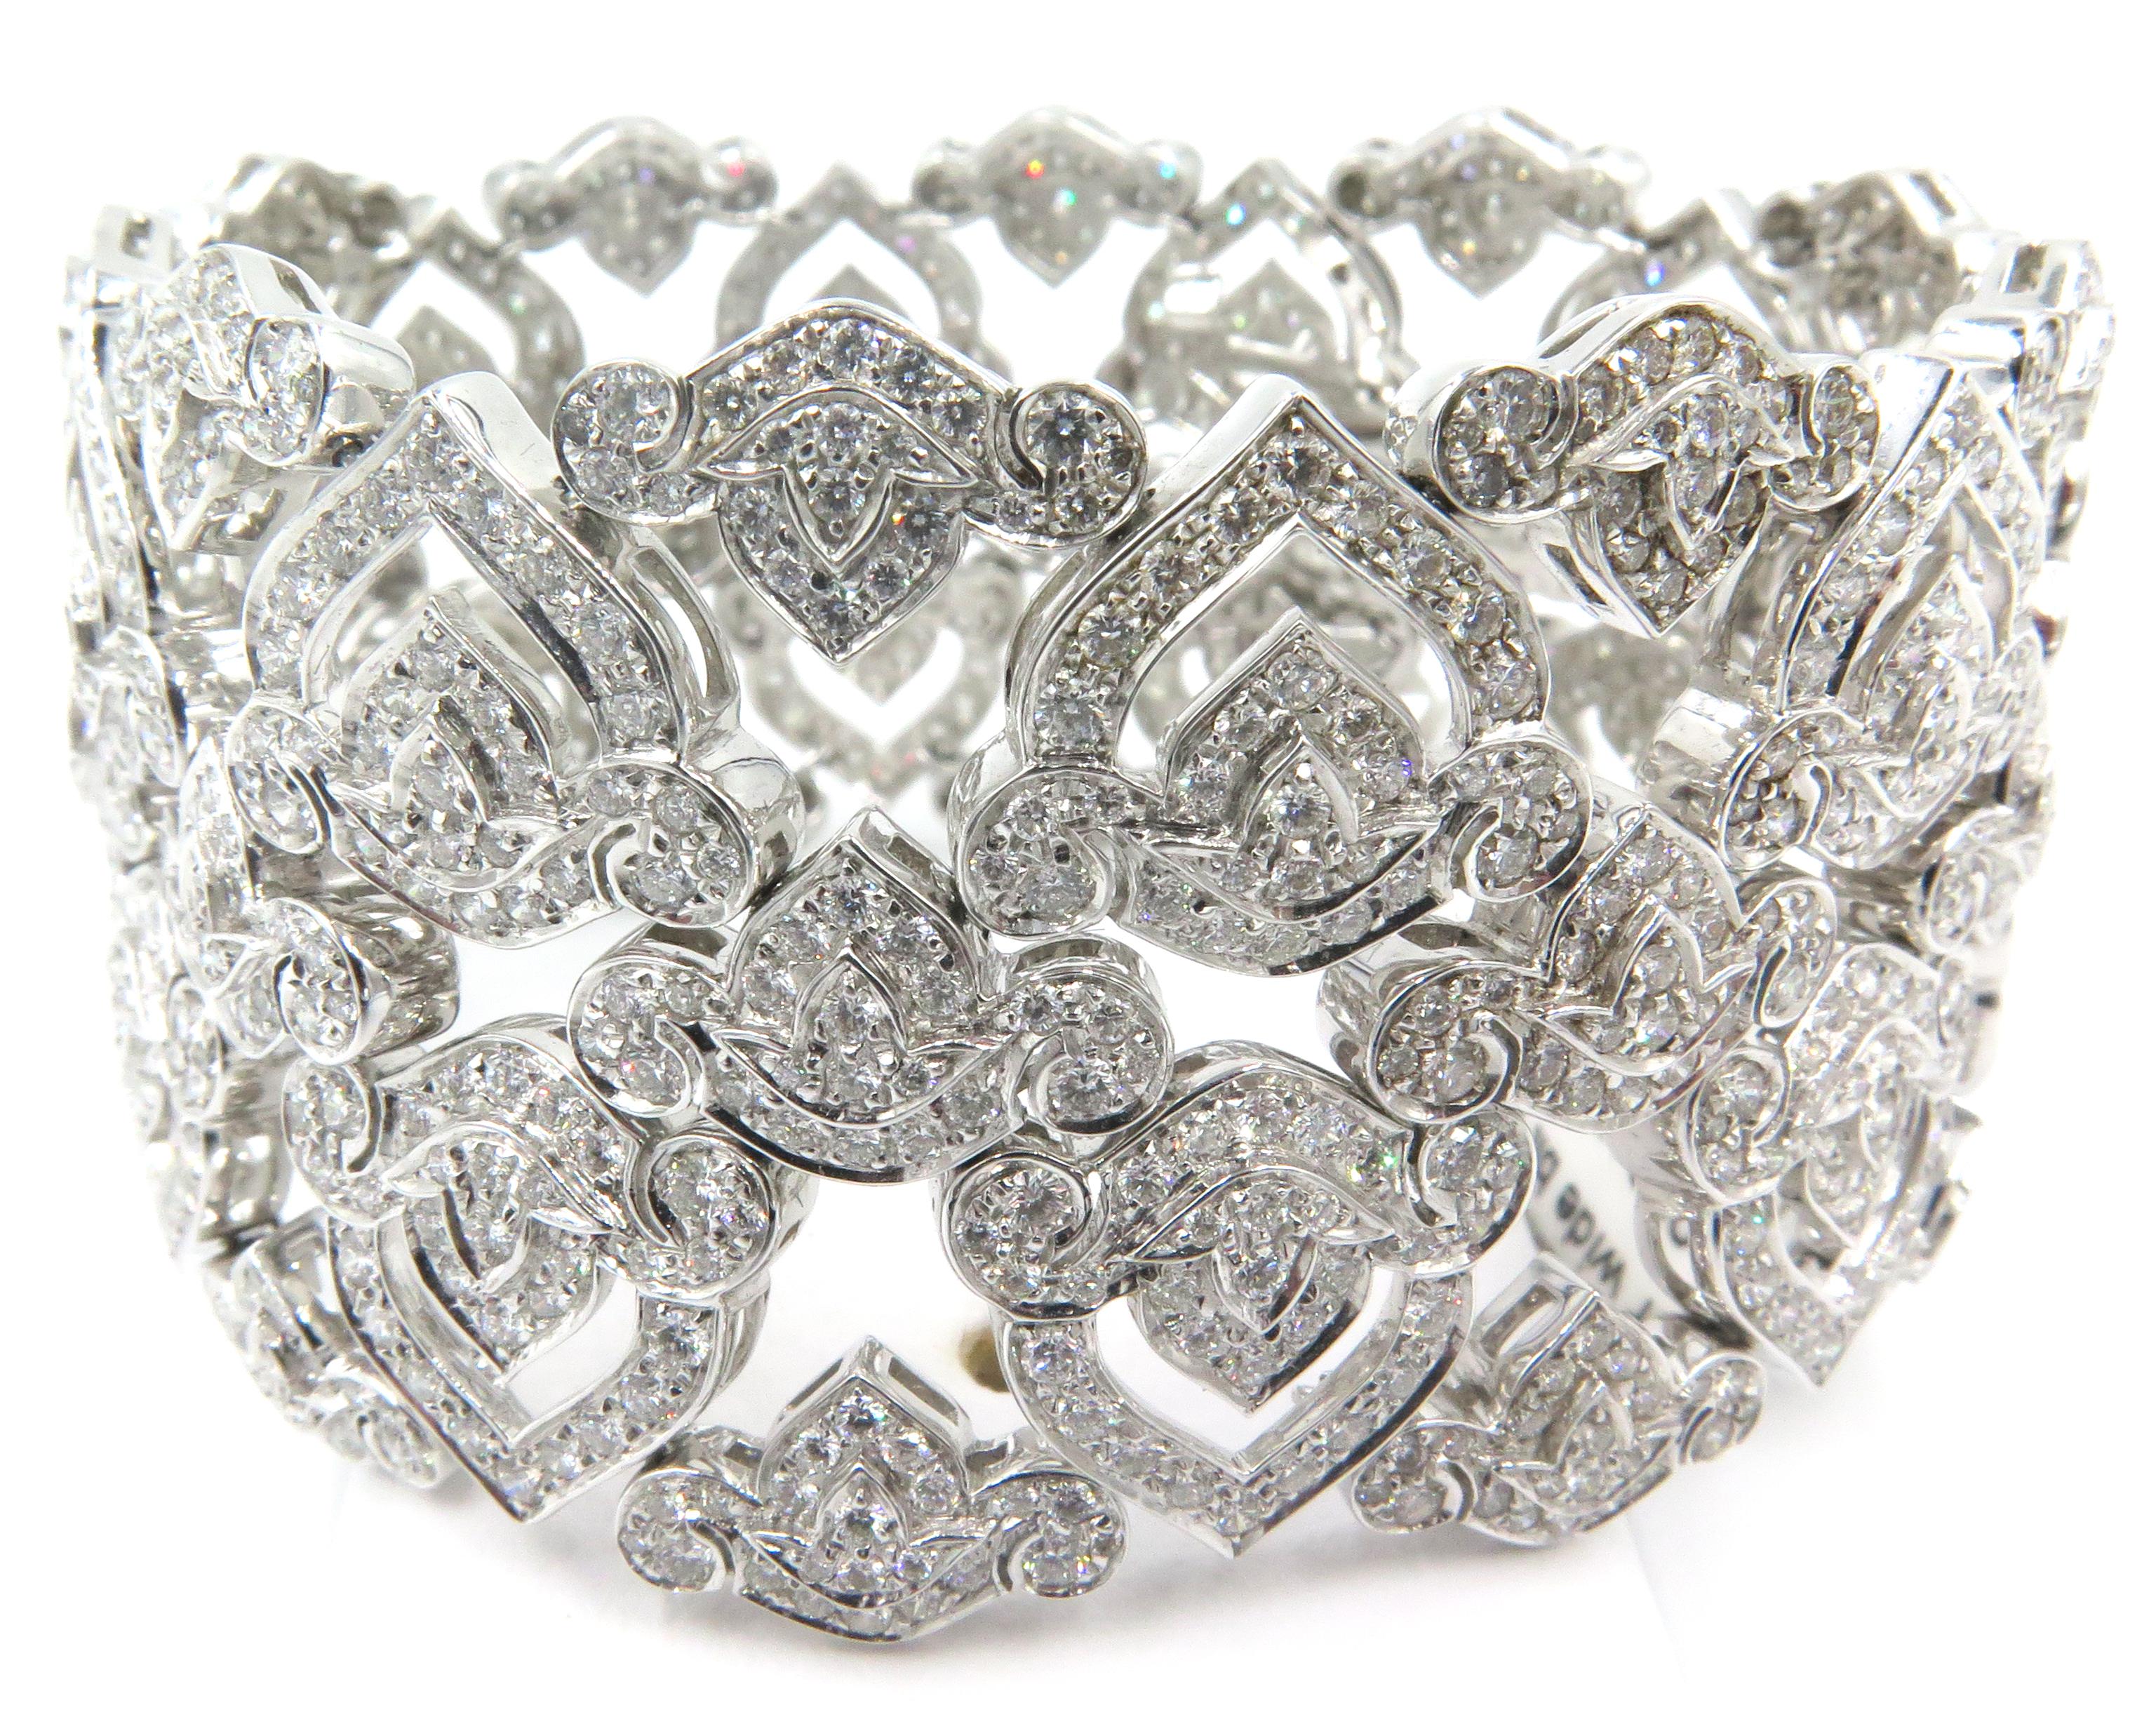 Feminine, lacey ,romantic, and just plain beautiful this bracelet by Asprey of London is crafted in 18k white gold, and set with 13.25cts of fine diamonds. This regal bracelet is fit for a queen and it happens to have been created by a jeweler who